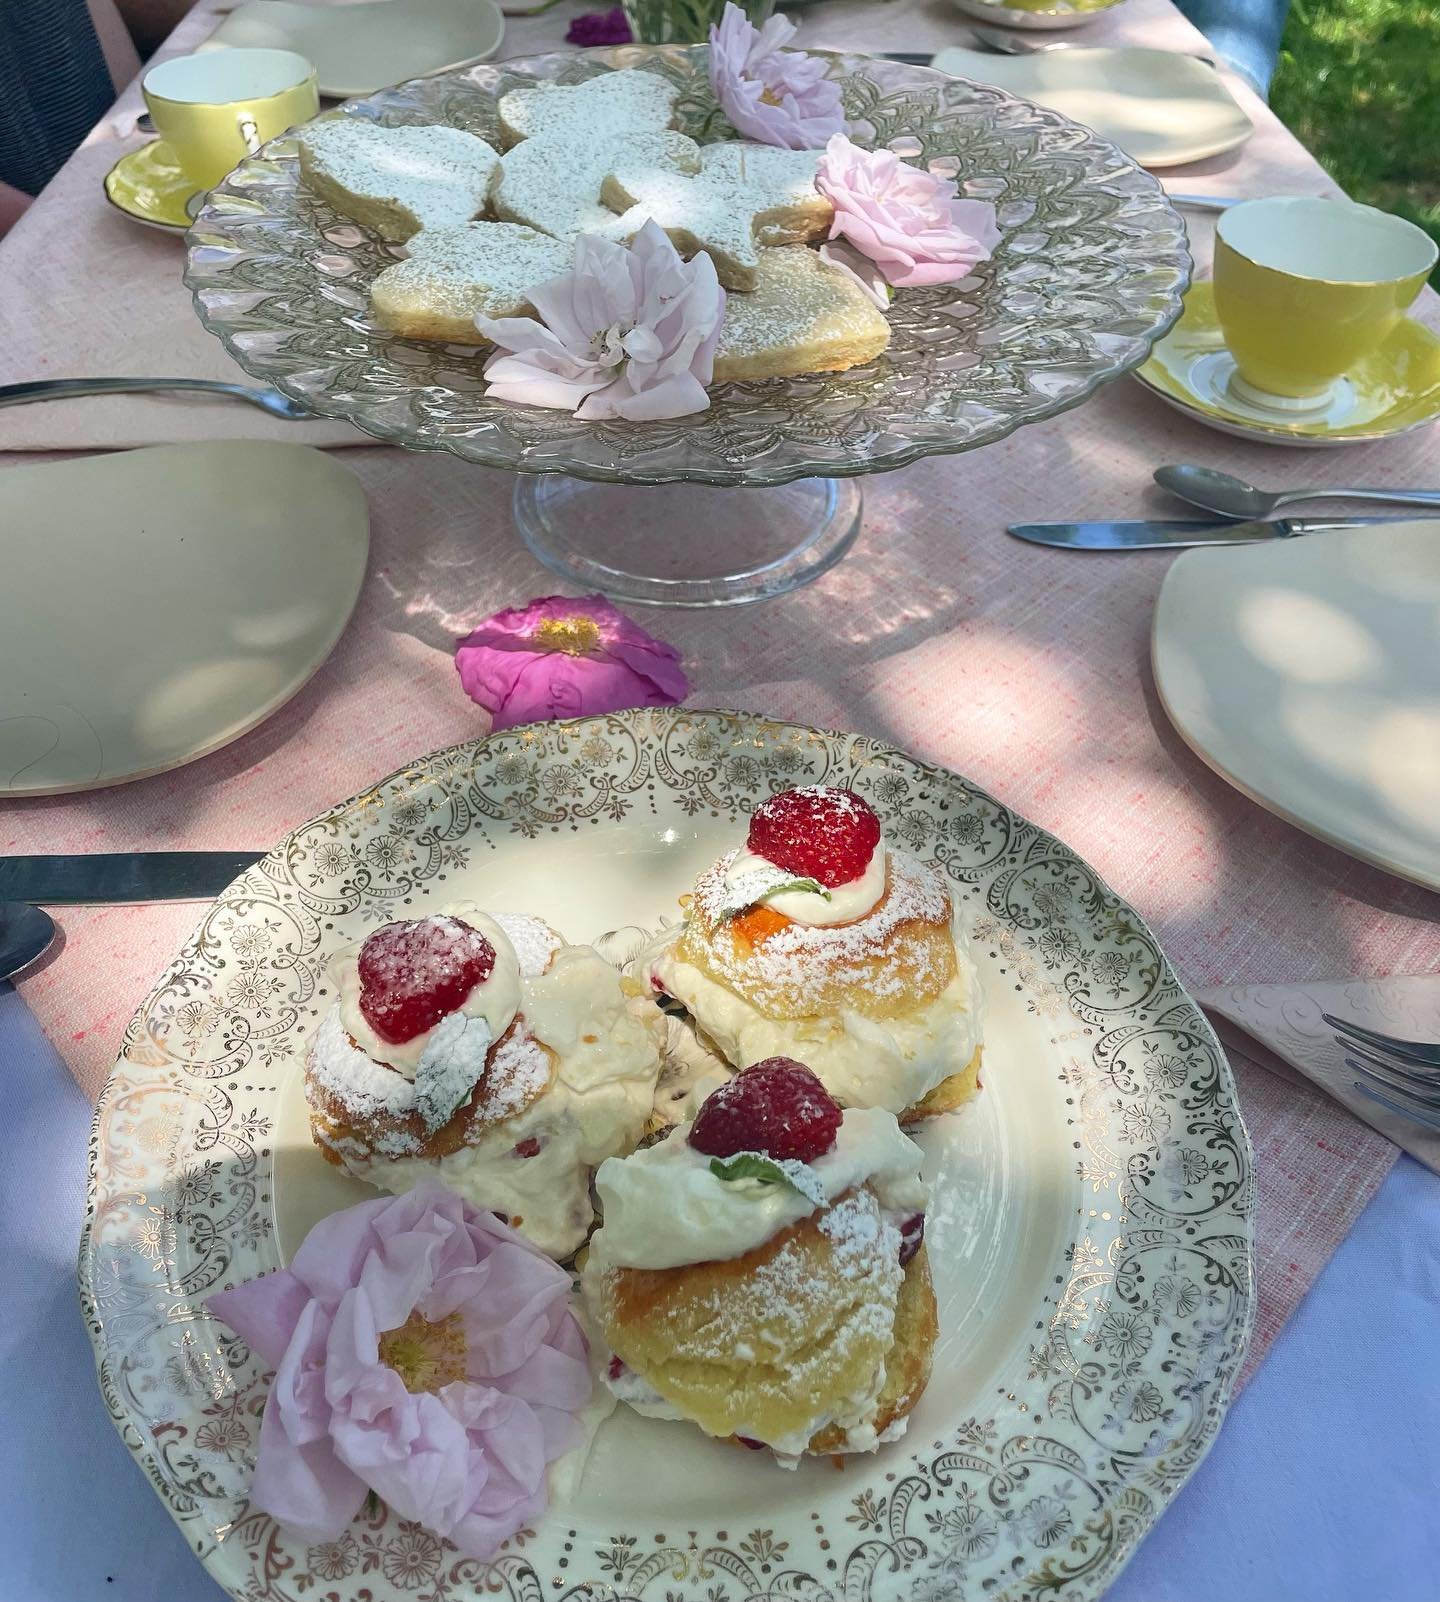 On this rainy day, we&rsquo;re dreaming about tea, sweets, and all of the delicious goodies that will be at our upcoming Afternoon Tea in celebration of Mother&rsquo;s Day on May 11th 🌷

Some tickets still available at obrienfarm.ca/store 💐